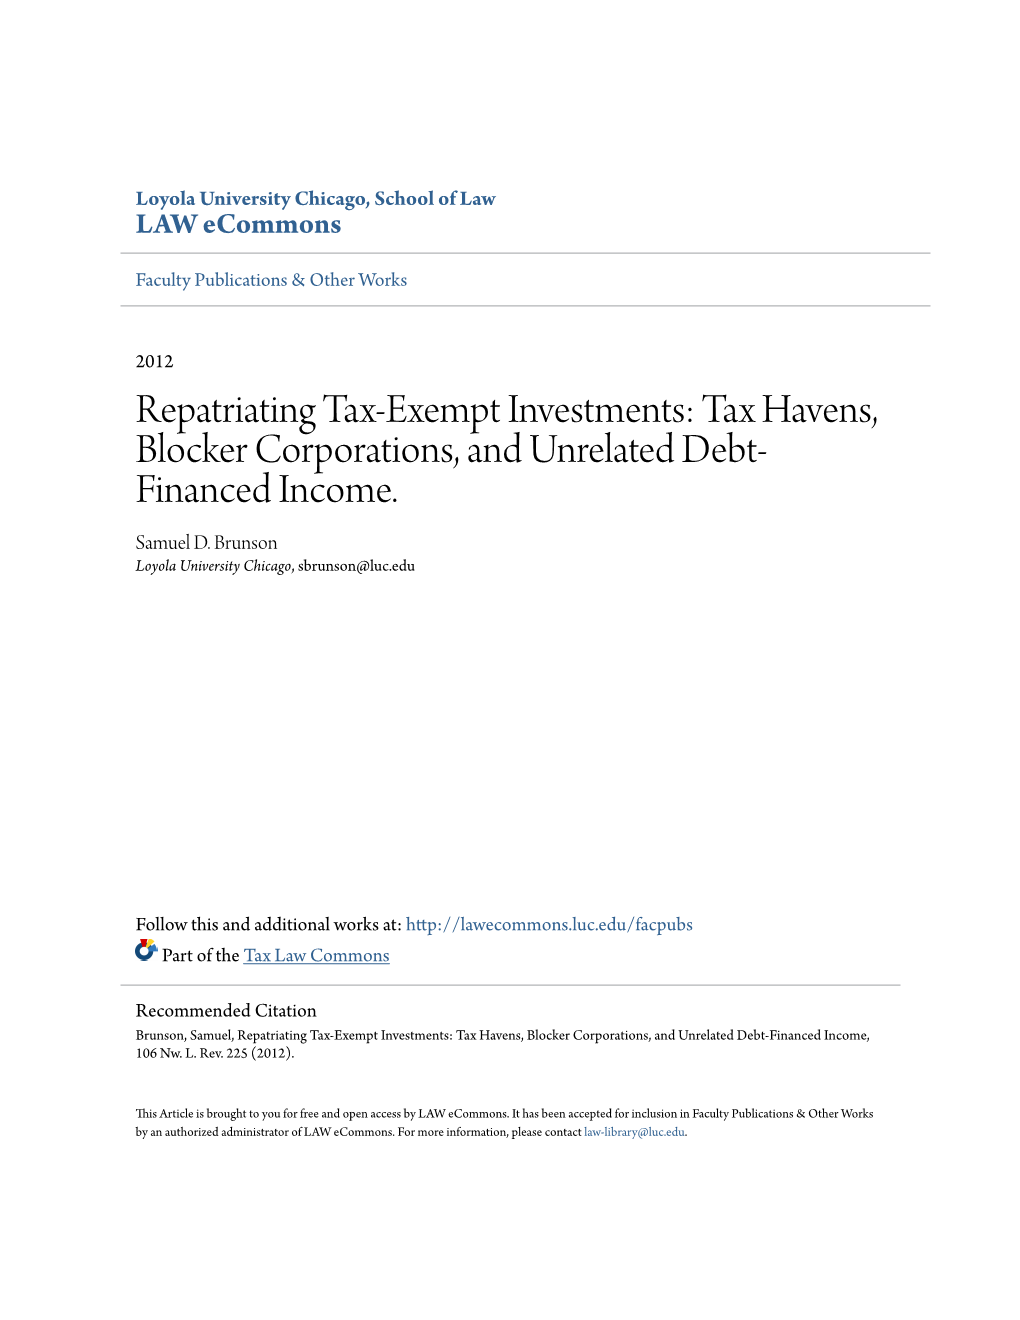 Tax Havens, Blocker Corporations, and Unrelated Debt-Financed Income, 106 Nw